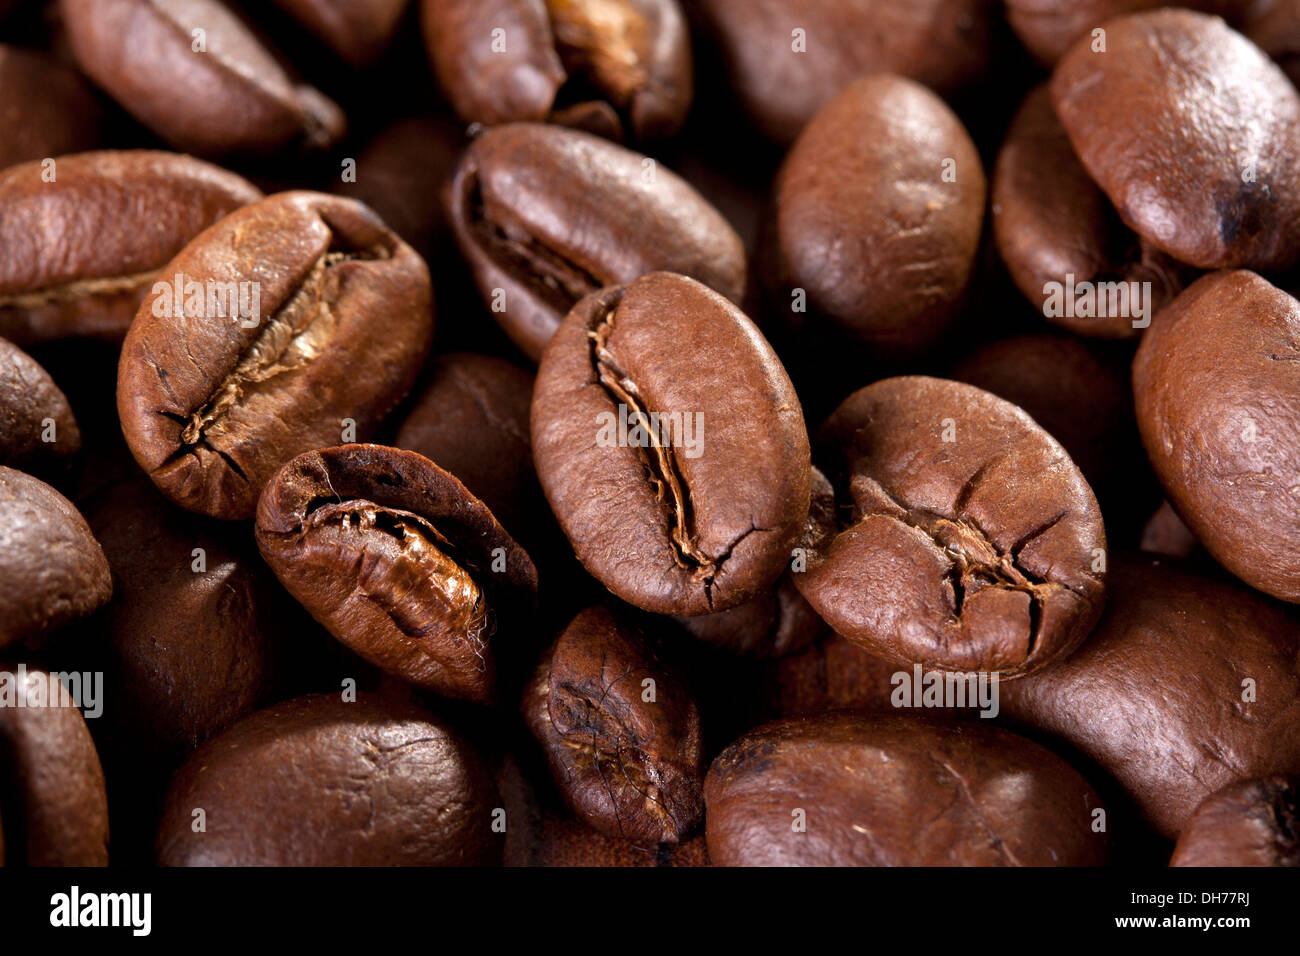 roasted coffee beans can be used for a background Stock Photo